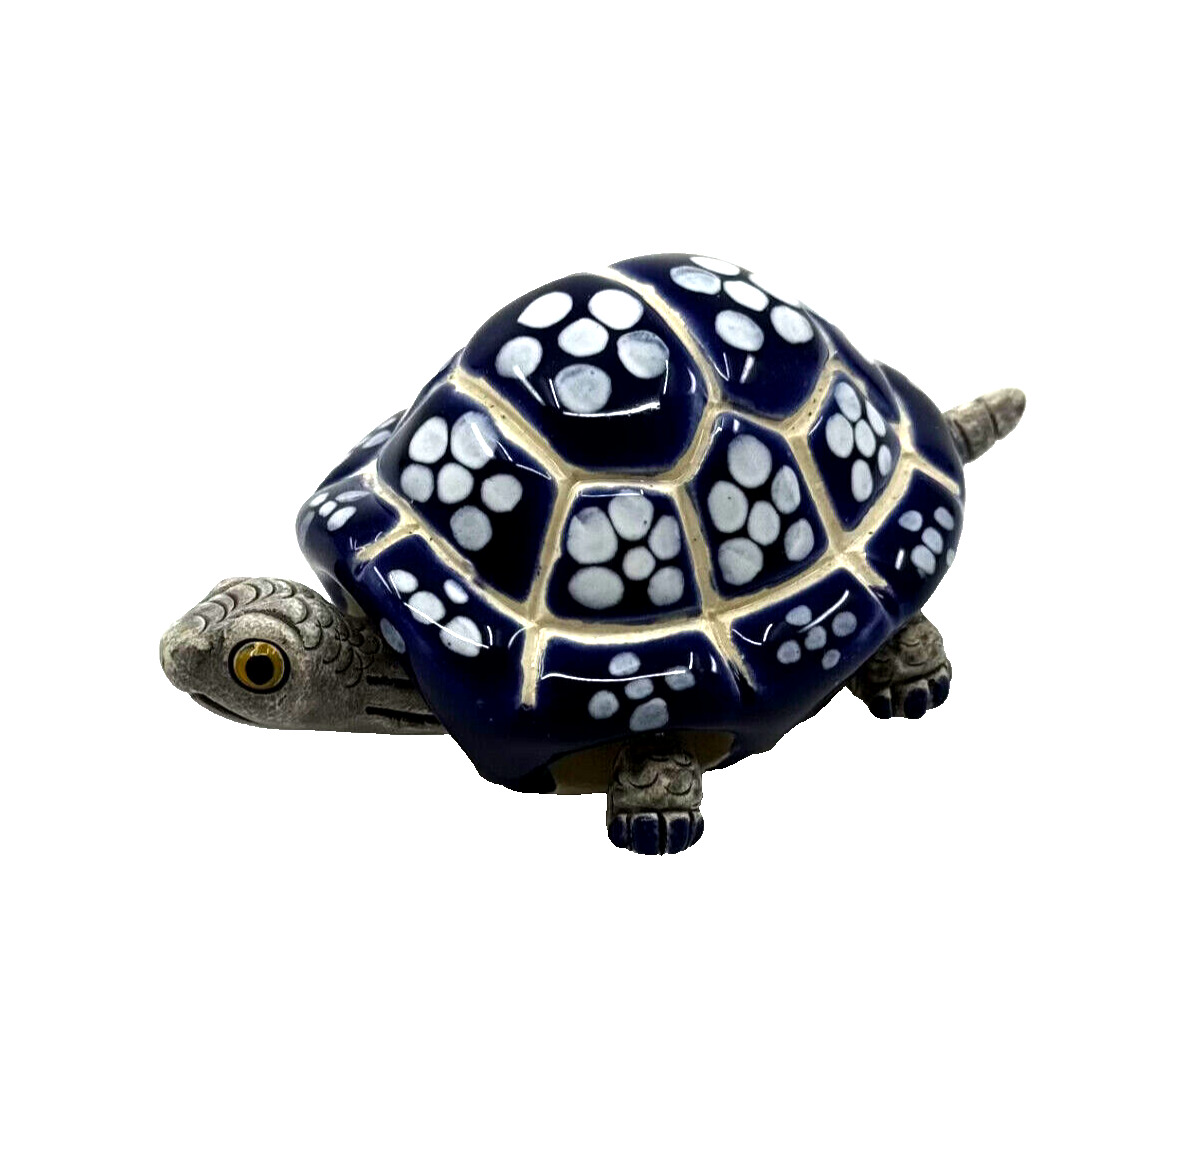 Vintage Ceramic Wiggling Turtle Navy with White Daisies New Old Stock LEPS Peru